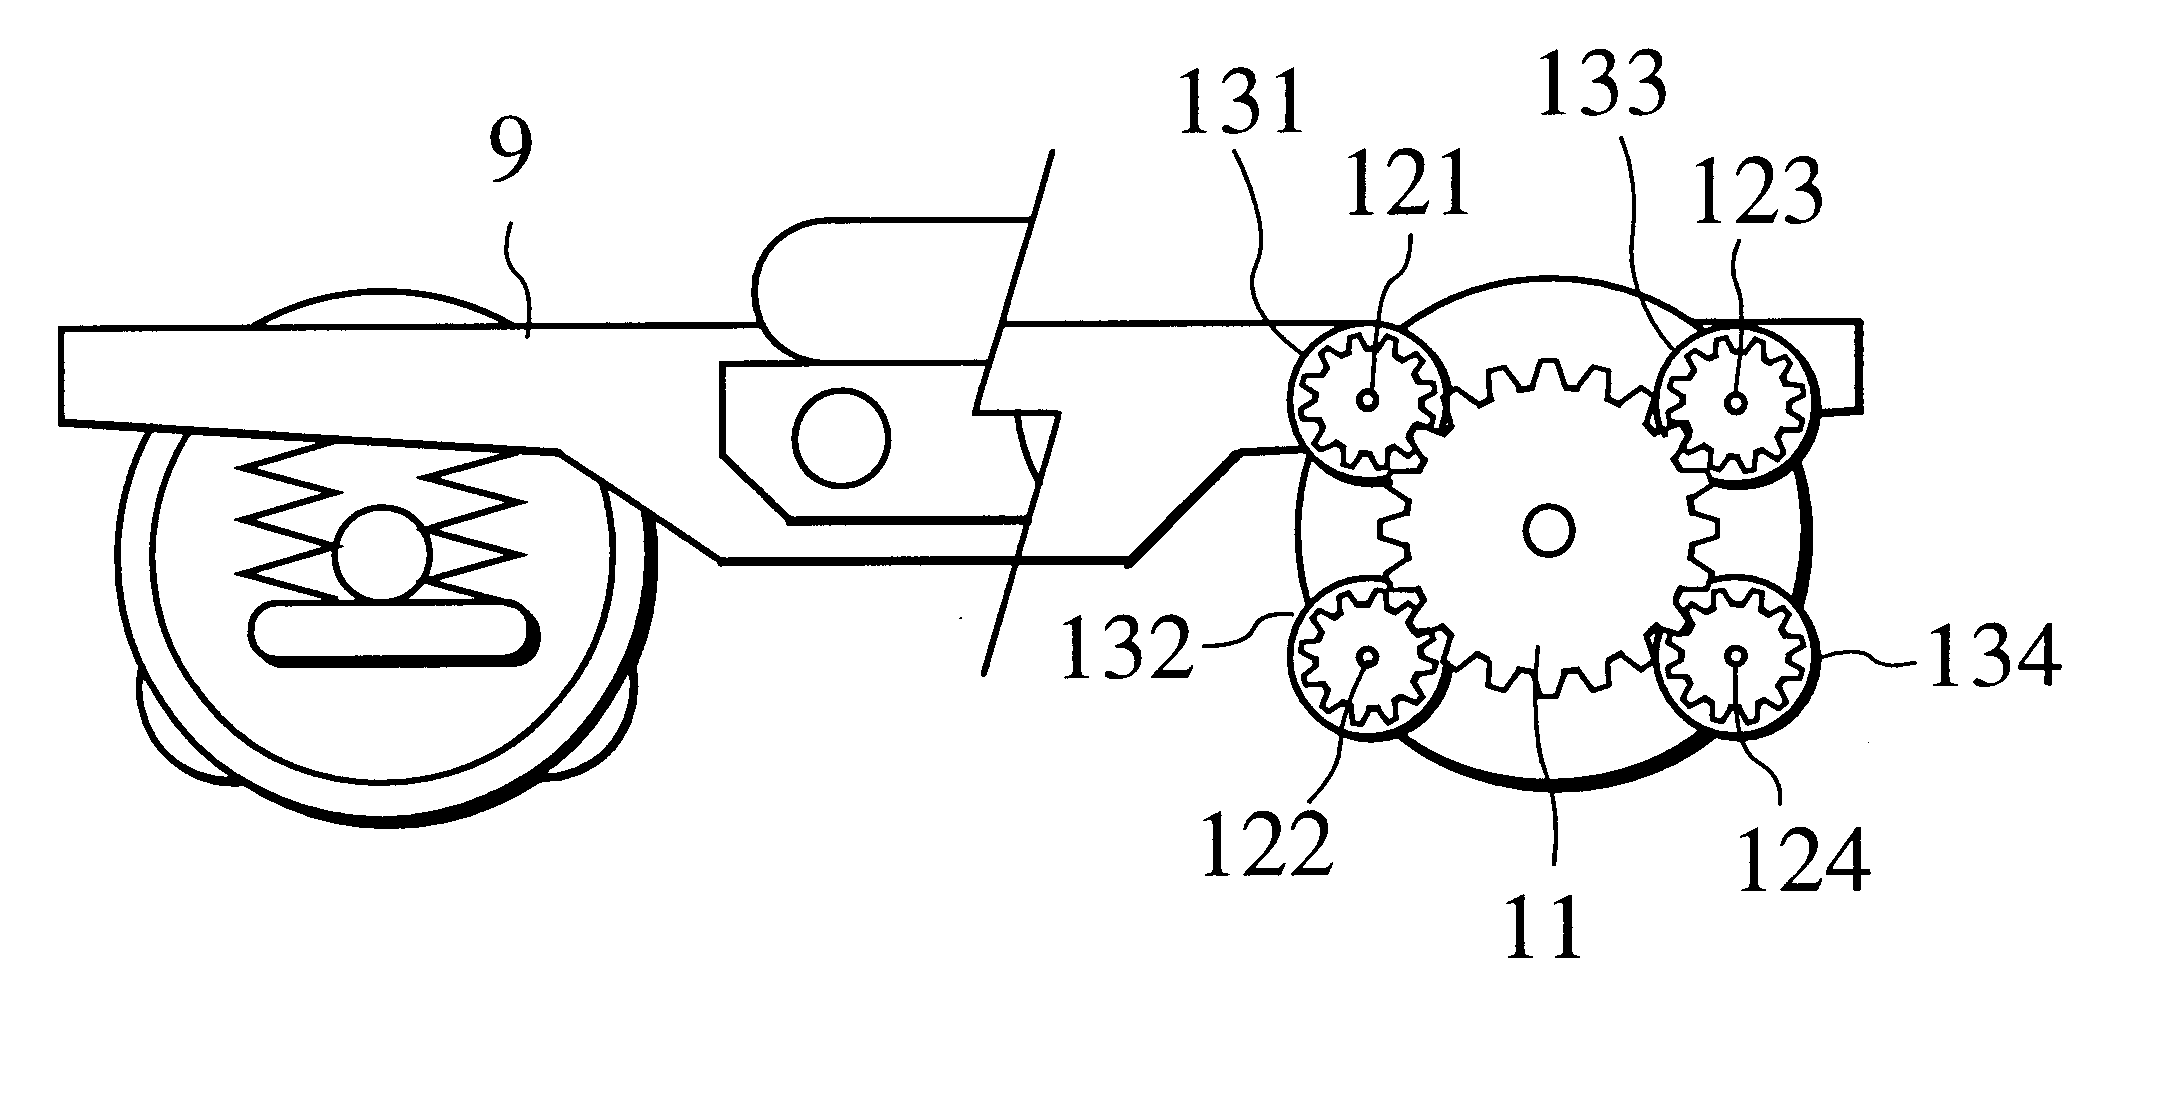 Apparatus for driving electric car by inverter-controlled motor through gear mechanism